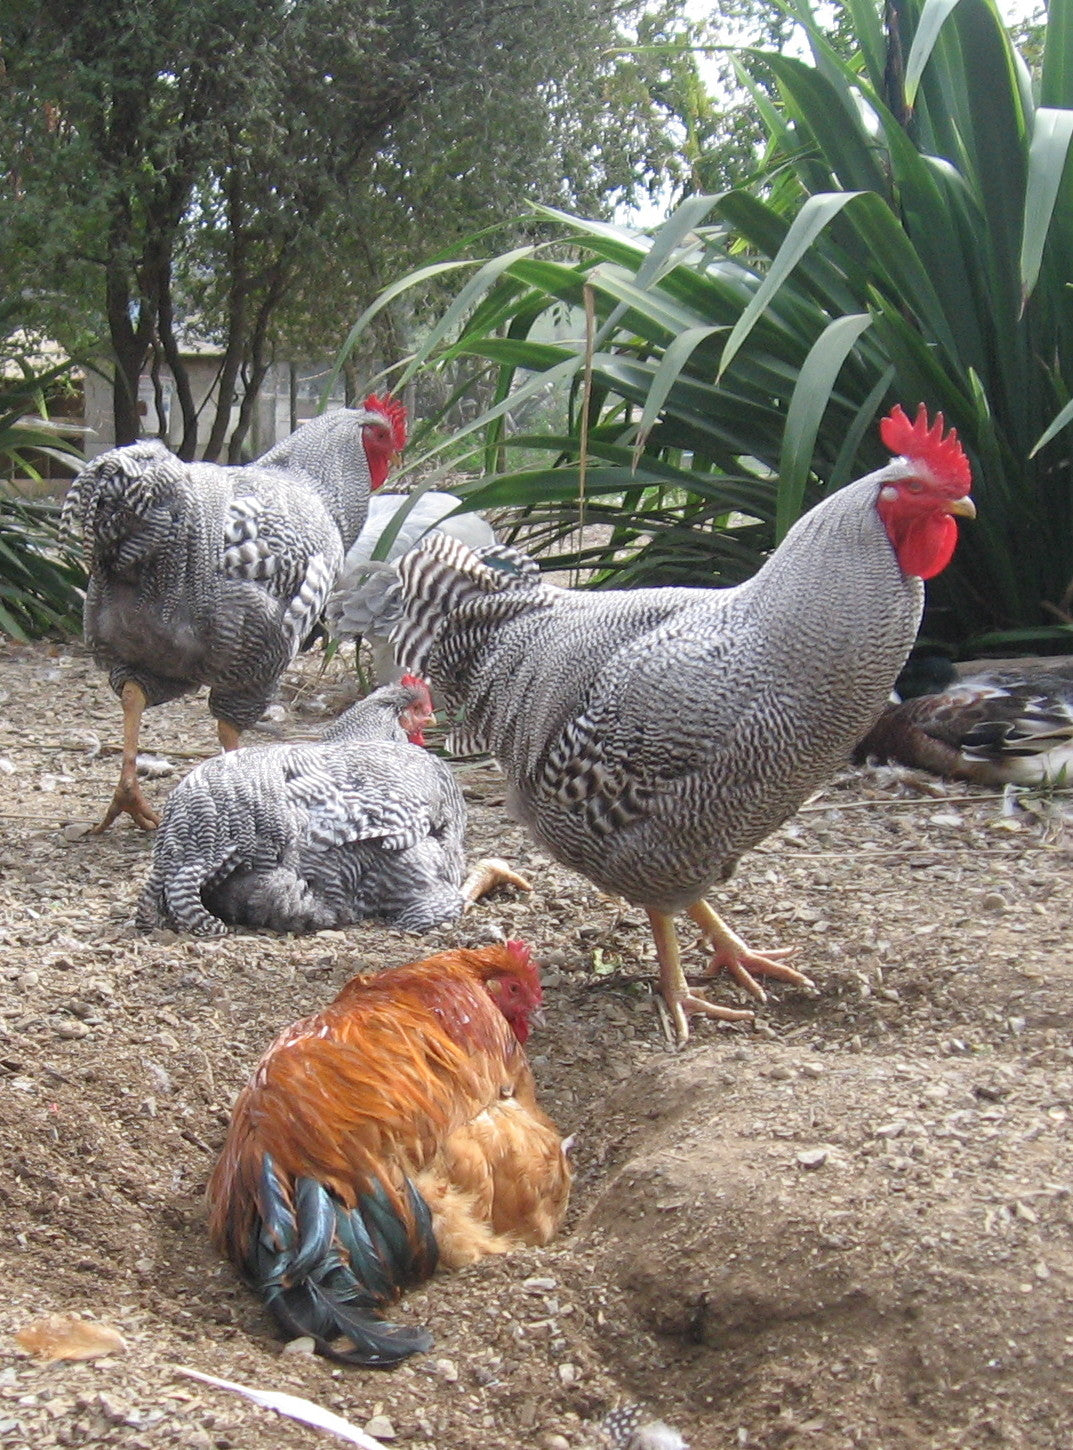 If your chickens don't have a dry patch of ground where they can dig a hole, you'll need to provide them with an artificial dust bath